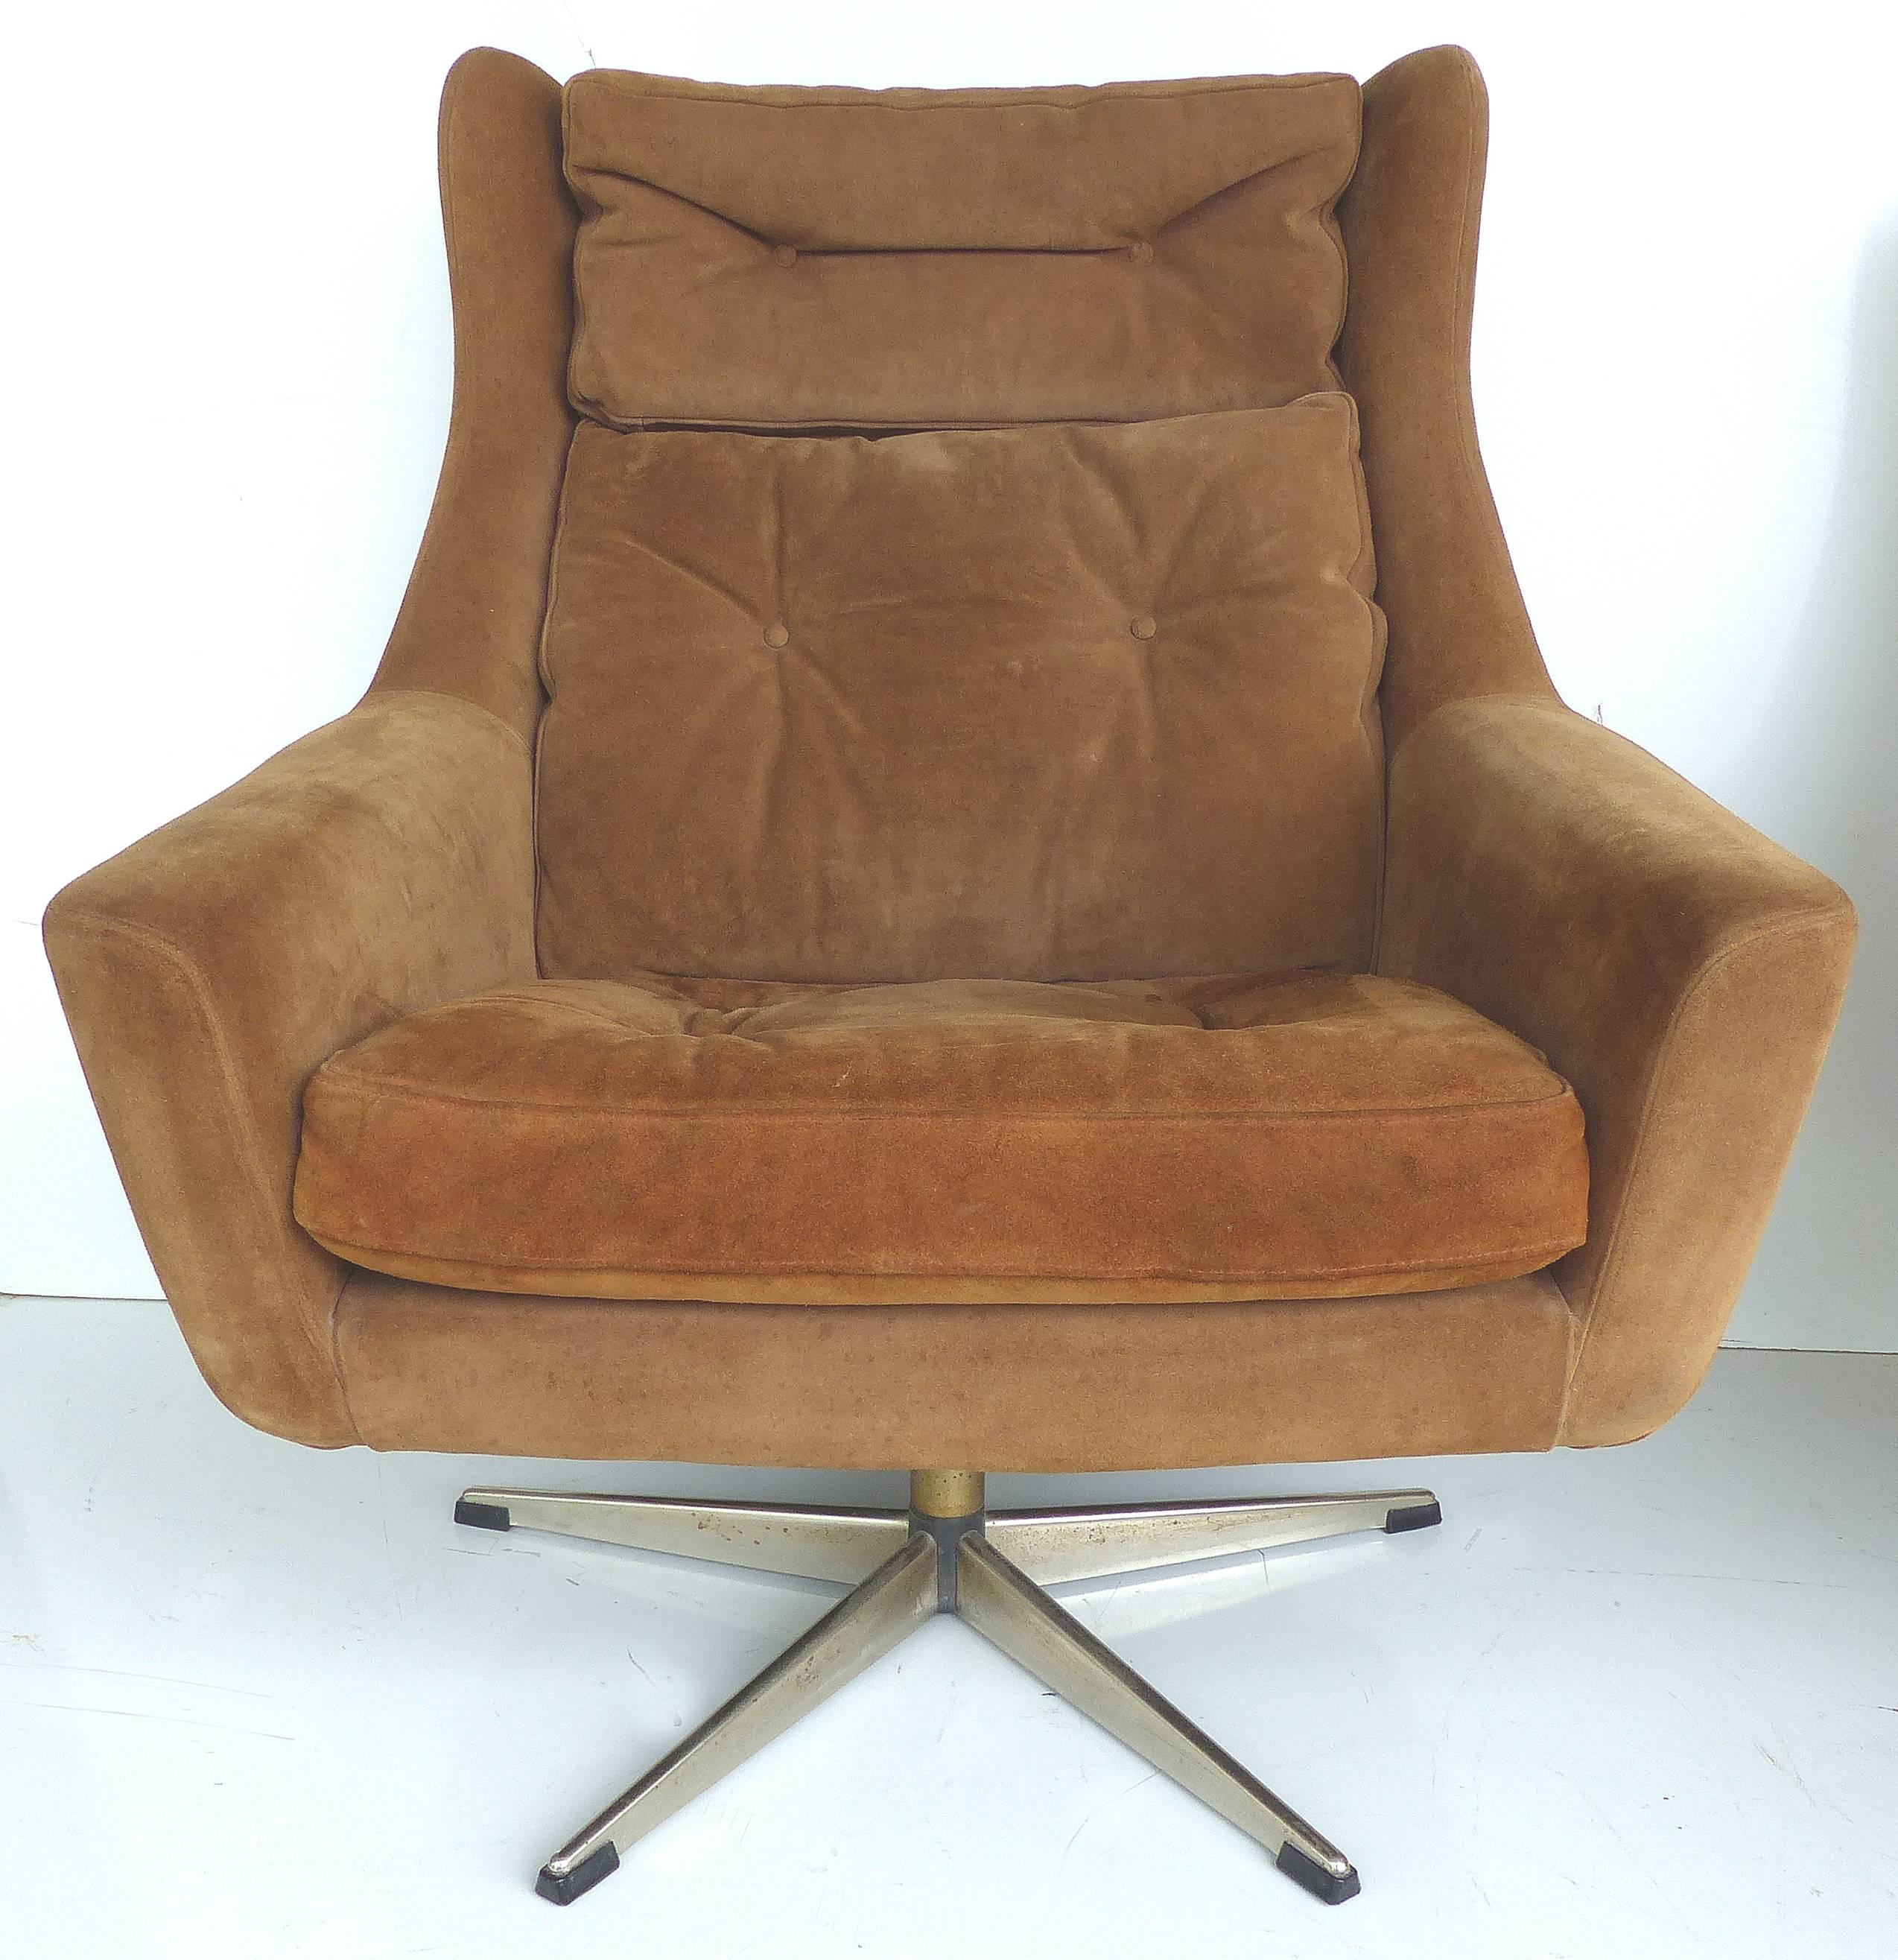 Offered is a of Danish Mid-Century Modern swivel lounge chair in suede imported by John Stuart that has an accompanying ottoman. The chair is large-scale and quite comfortable. Both pieces are supported by chrome pedestal bases with rubber feet.